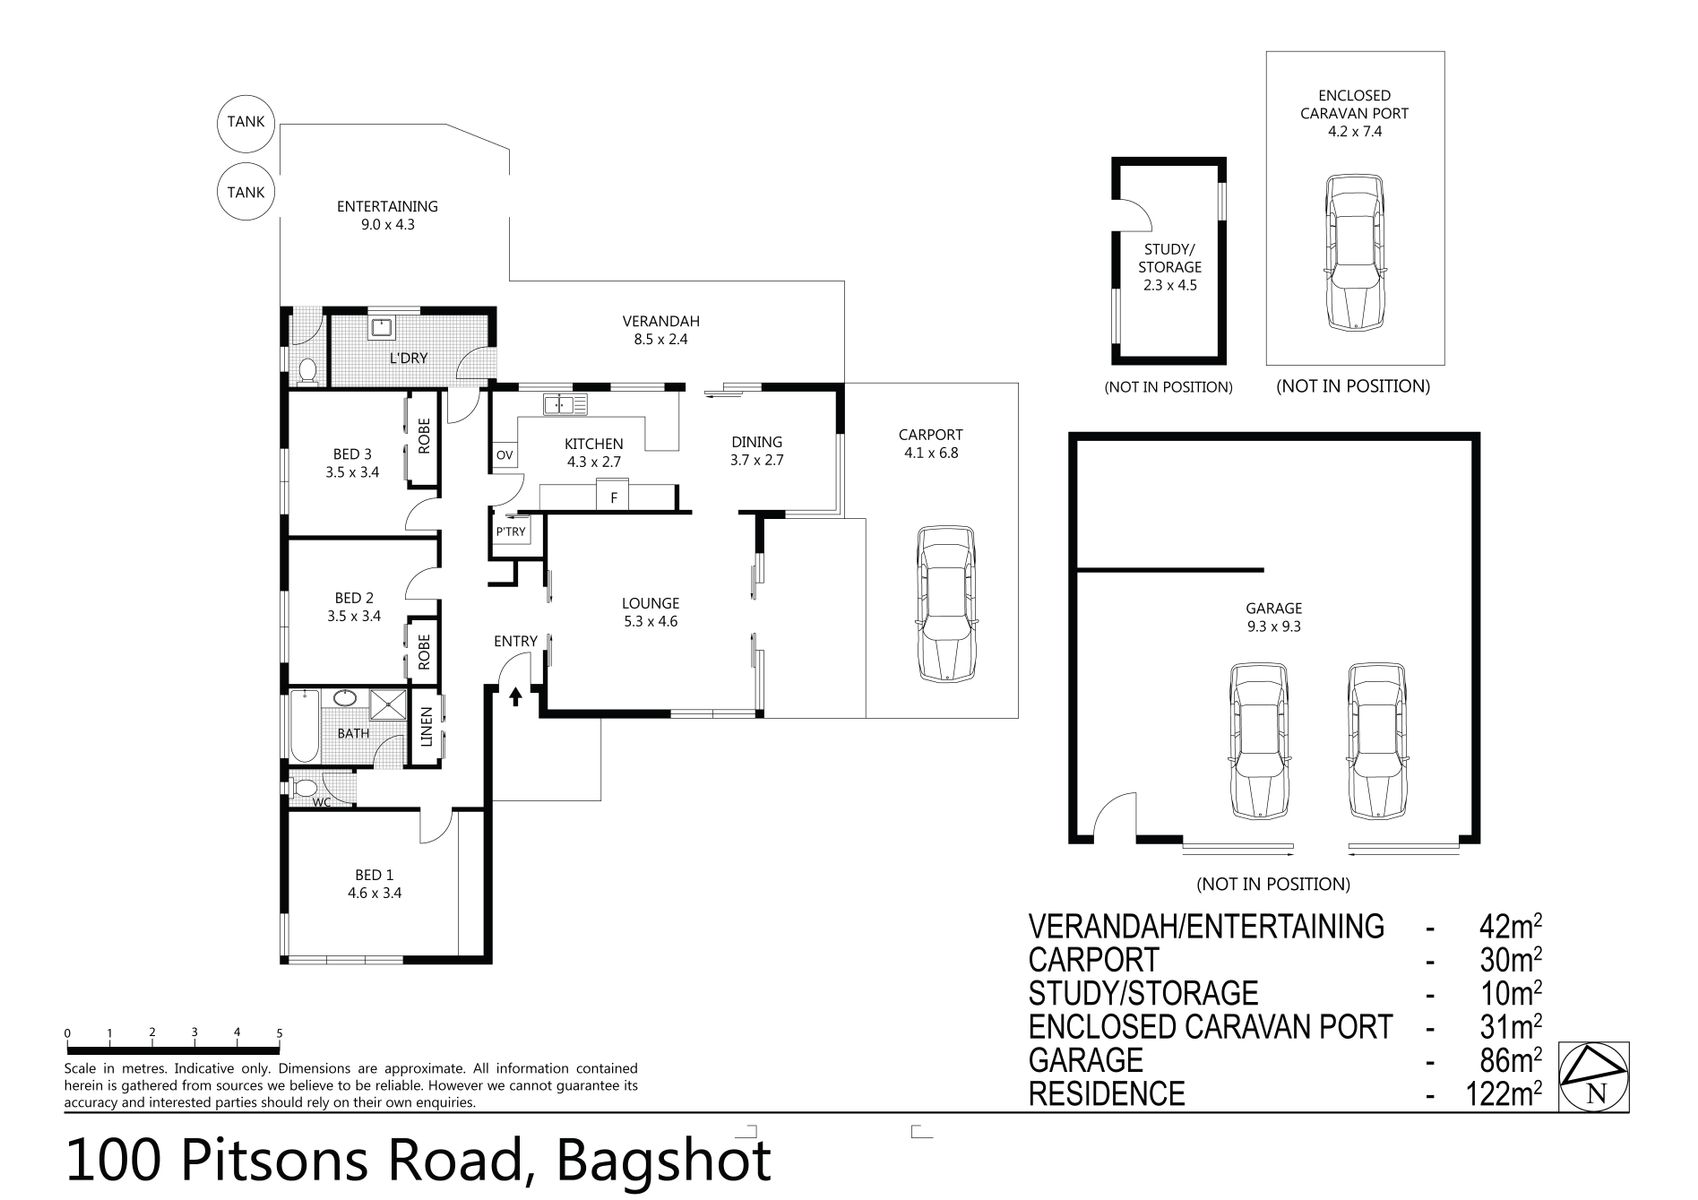 APPROVED FLOORPLAN 100 Pitsons Road, Bagshot (23 AUGUST 2018) 122 sqm (1)